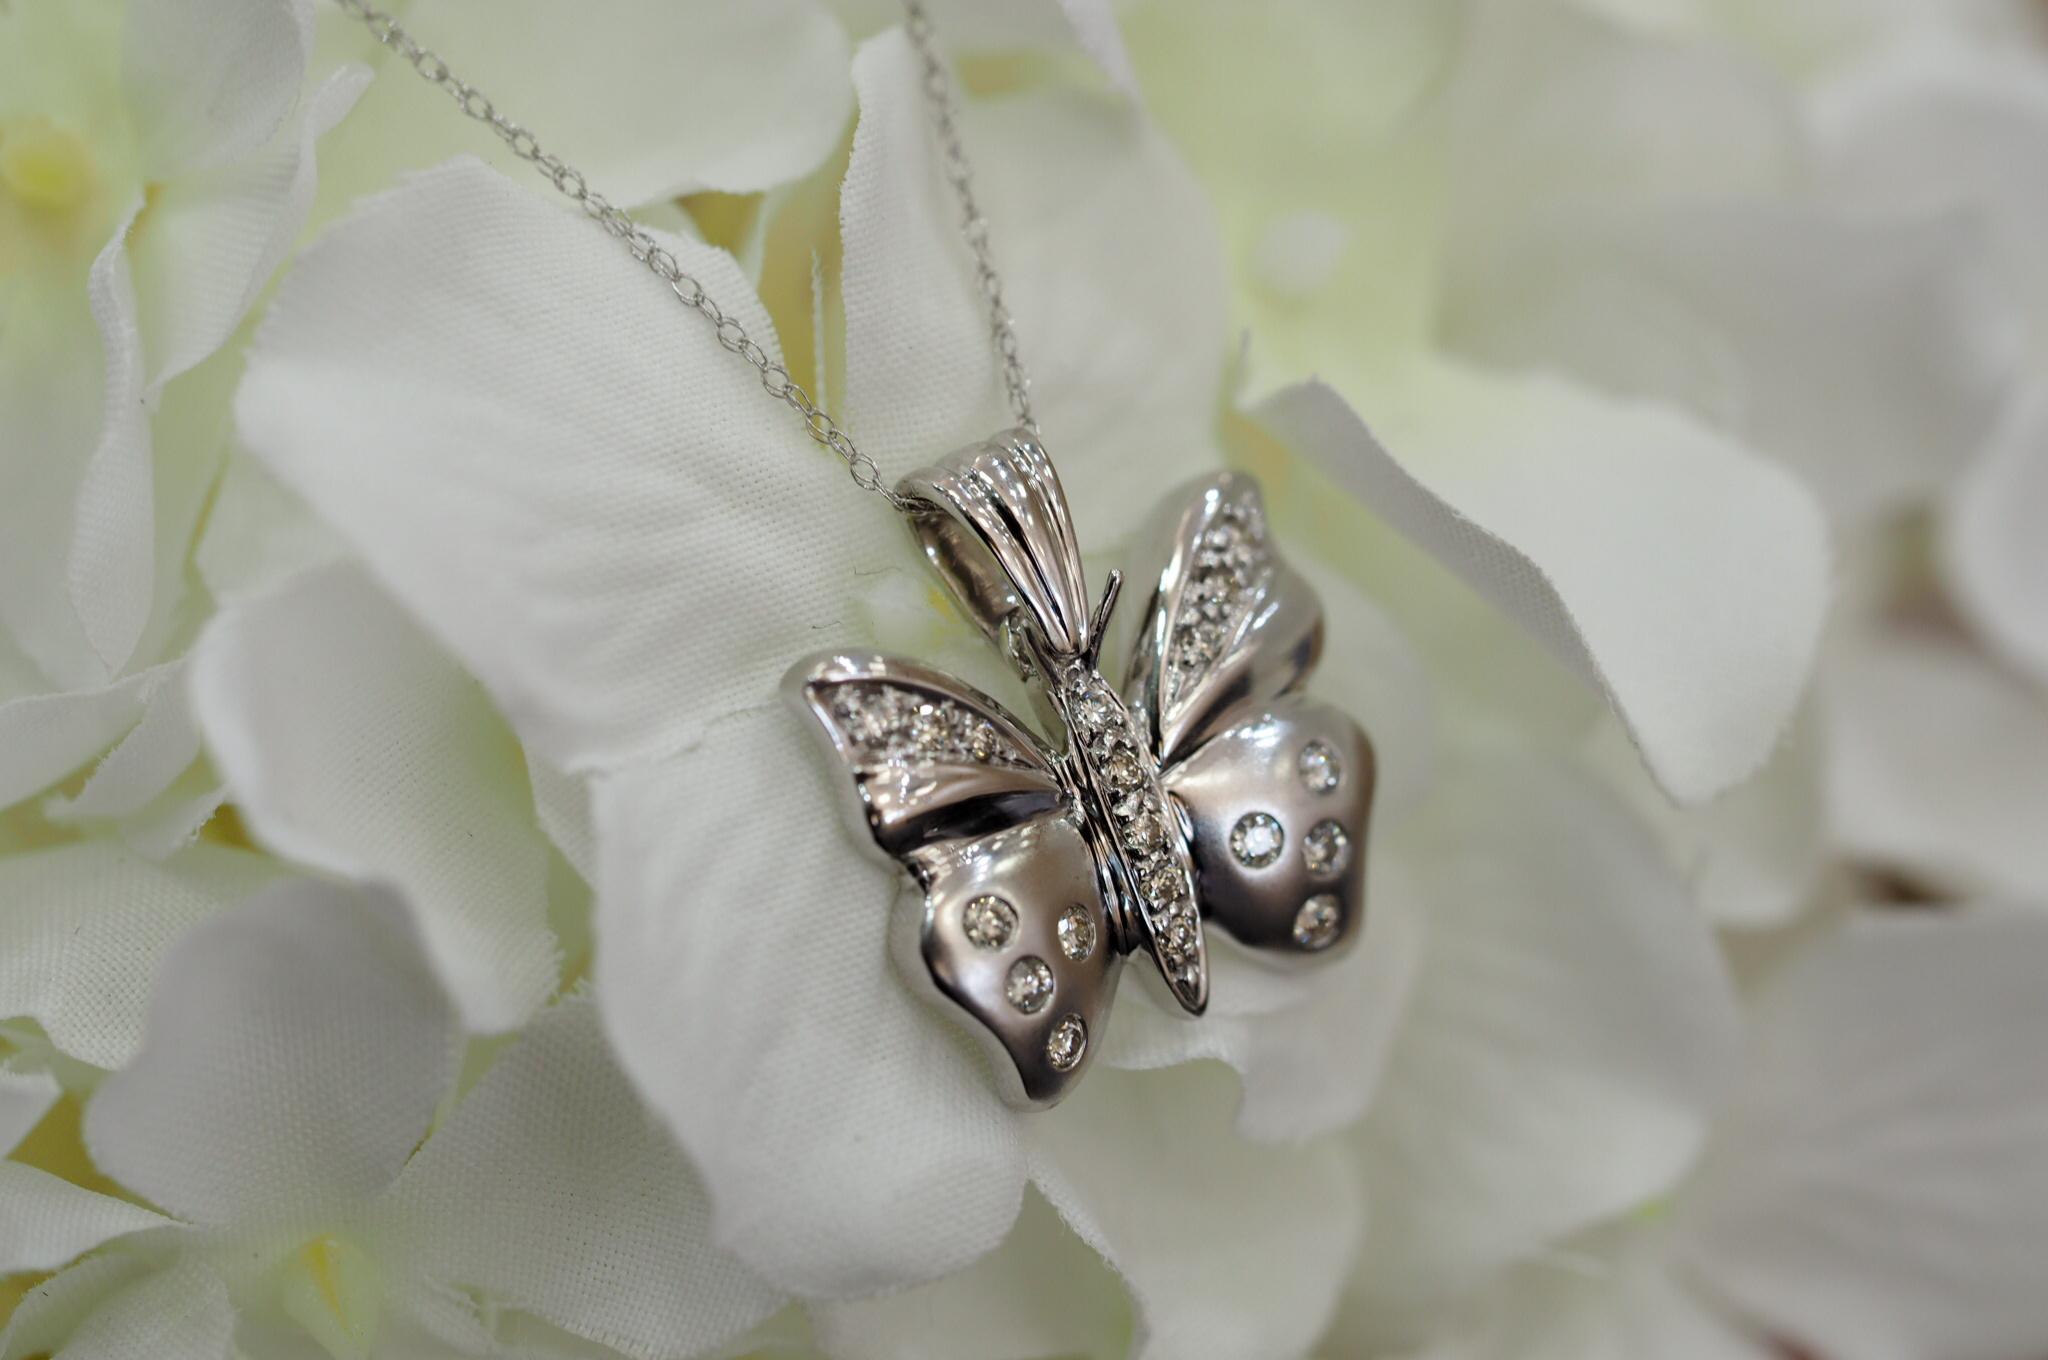 Beautiful 14K white gold butterfly pendant with 0.25ctw of round diamonds accenting the butterfly wings perfectly with on a 14k white gold  16 inch cable link necklace.